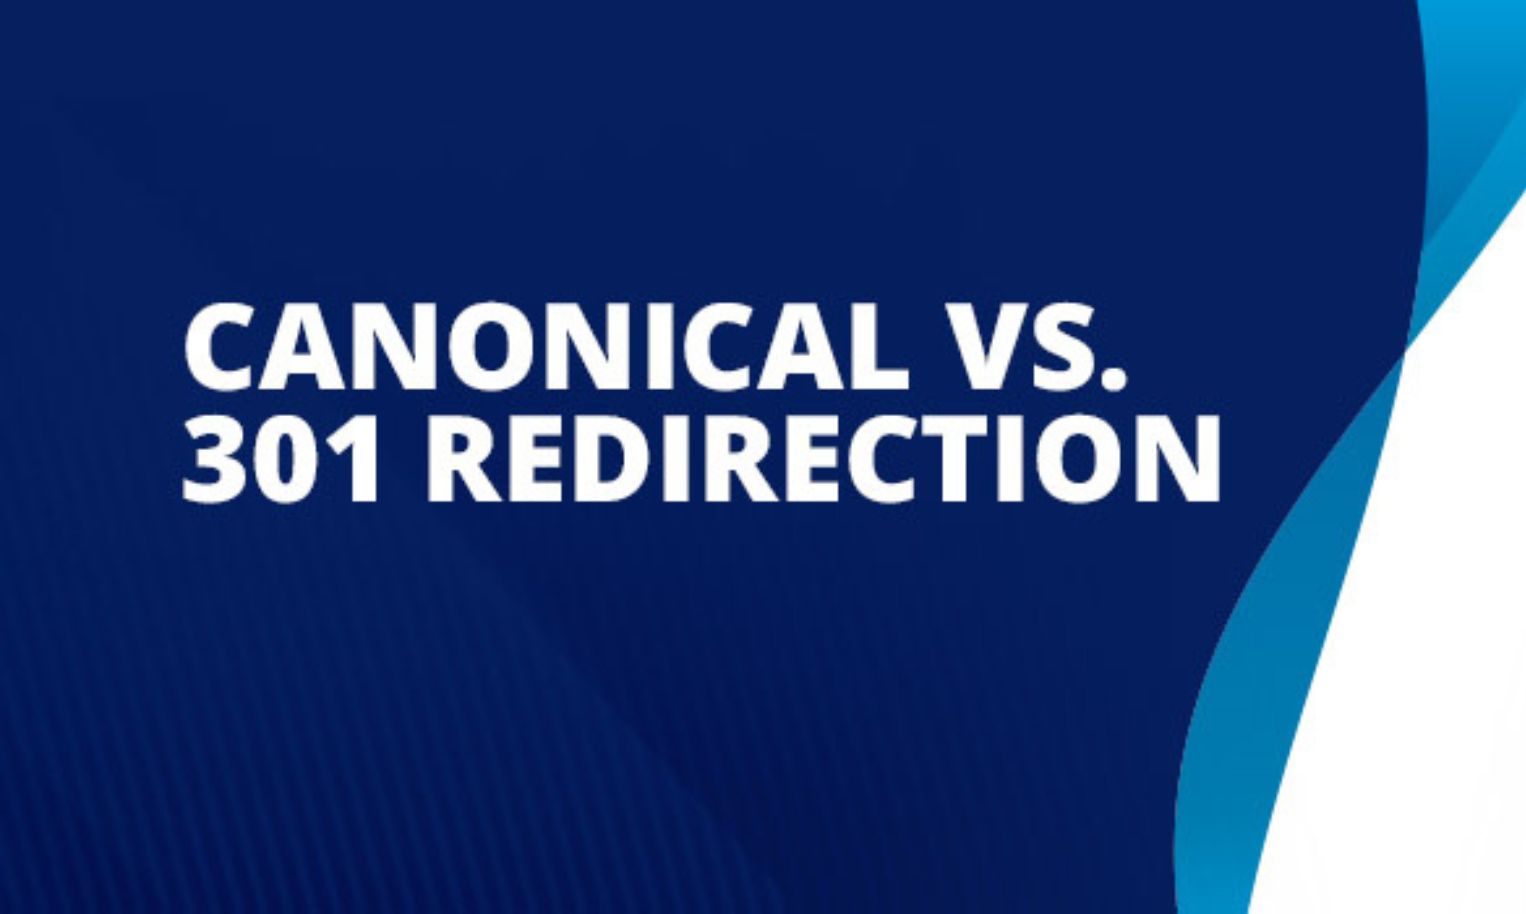 When Is 301 Redirect Preferred Over Canonical Link?